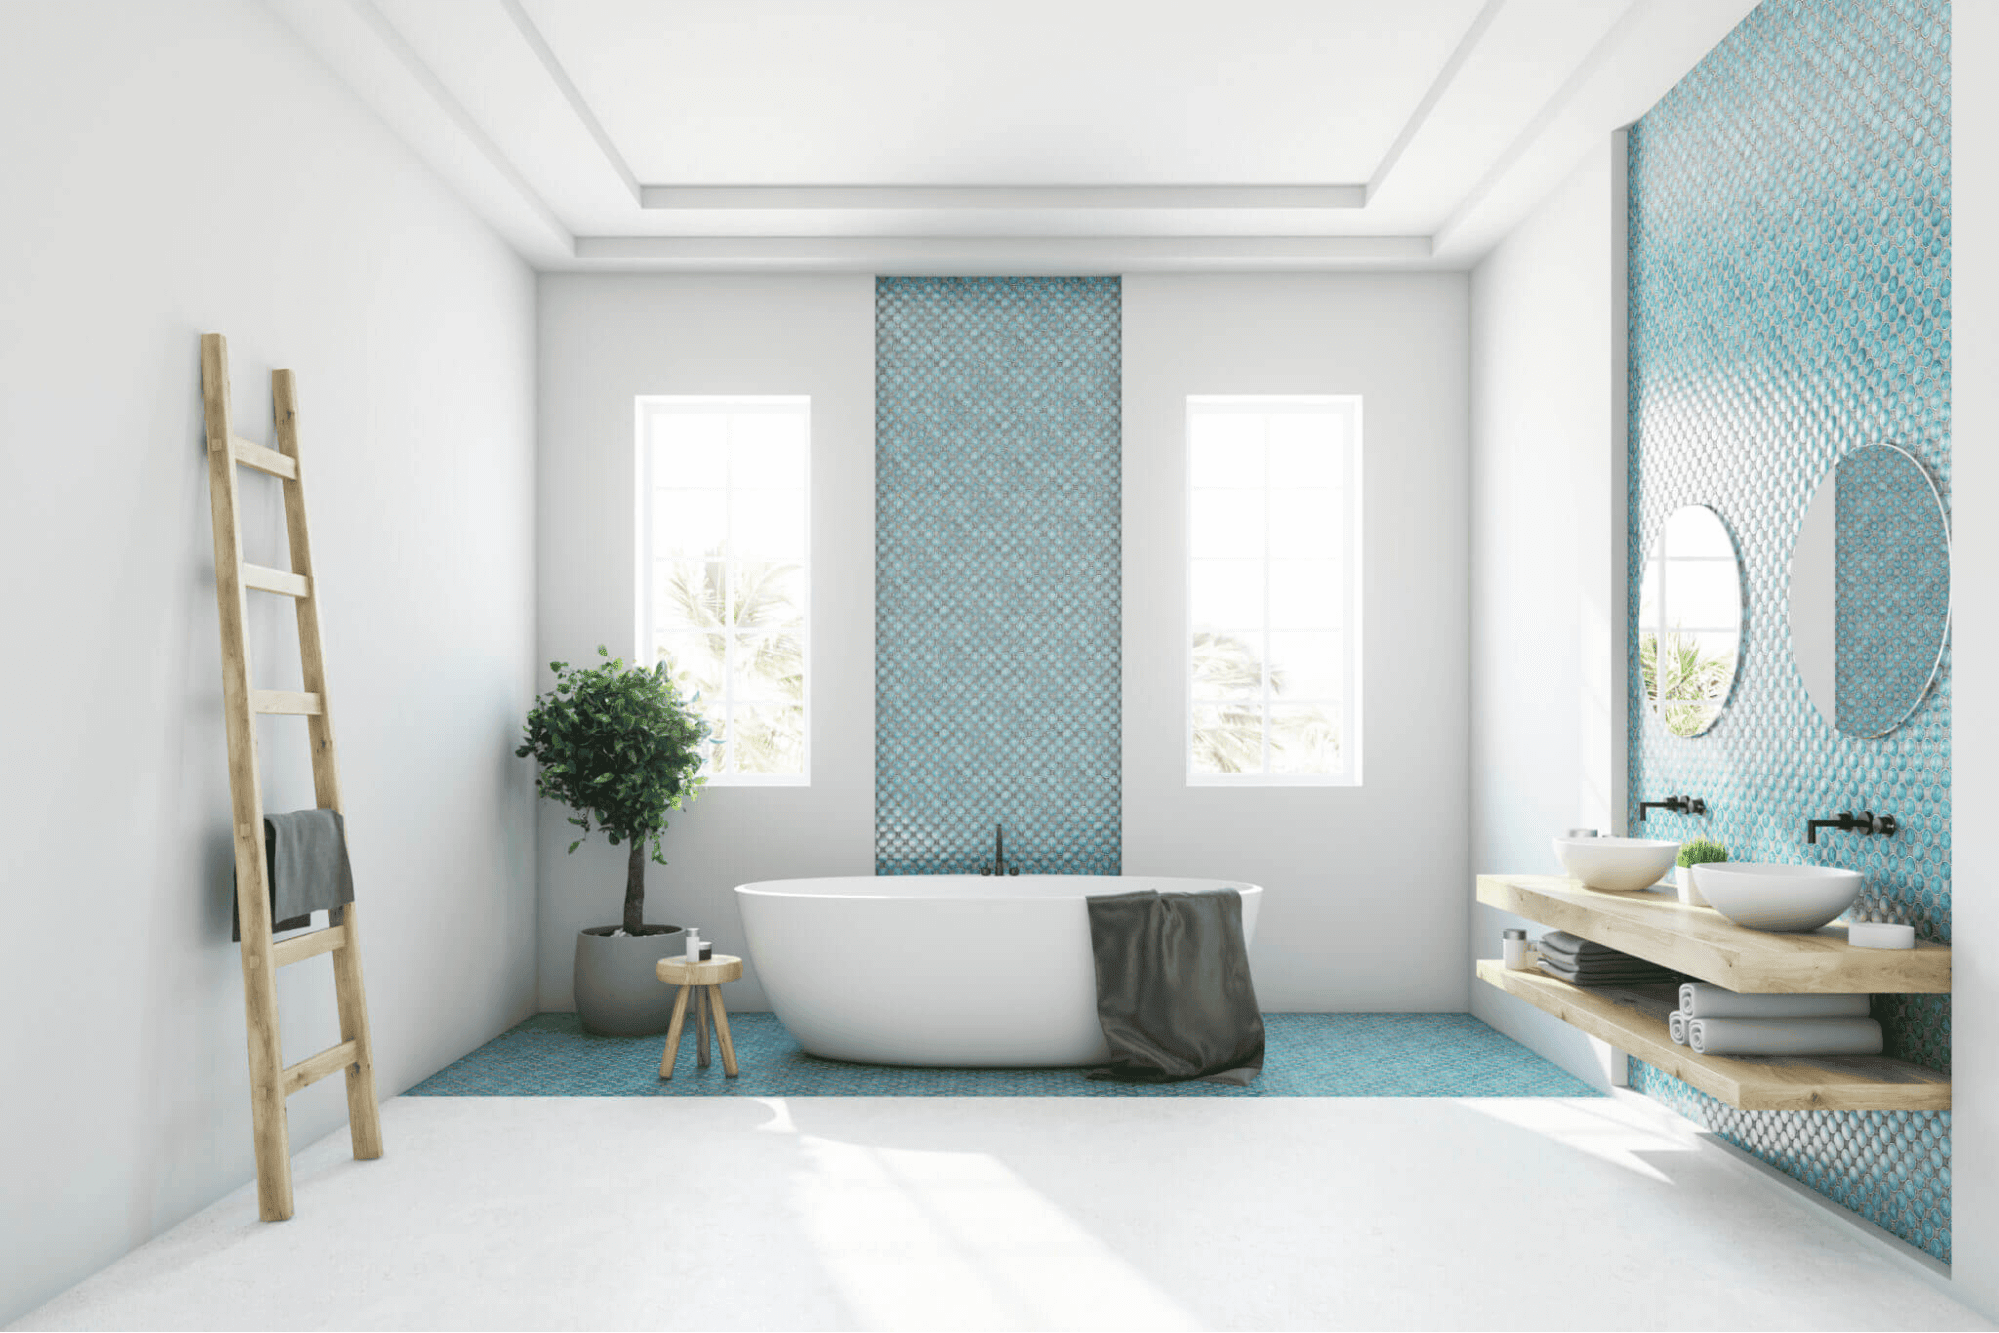 Bathroom with penny round tile floor pattern